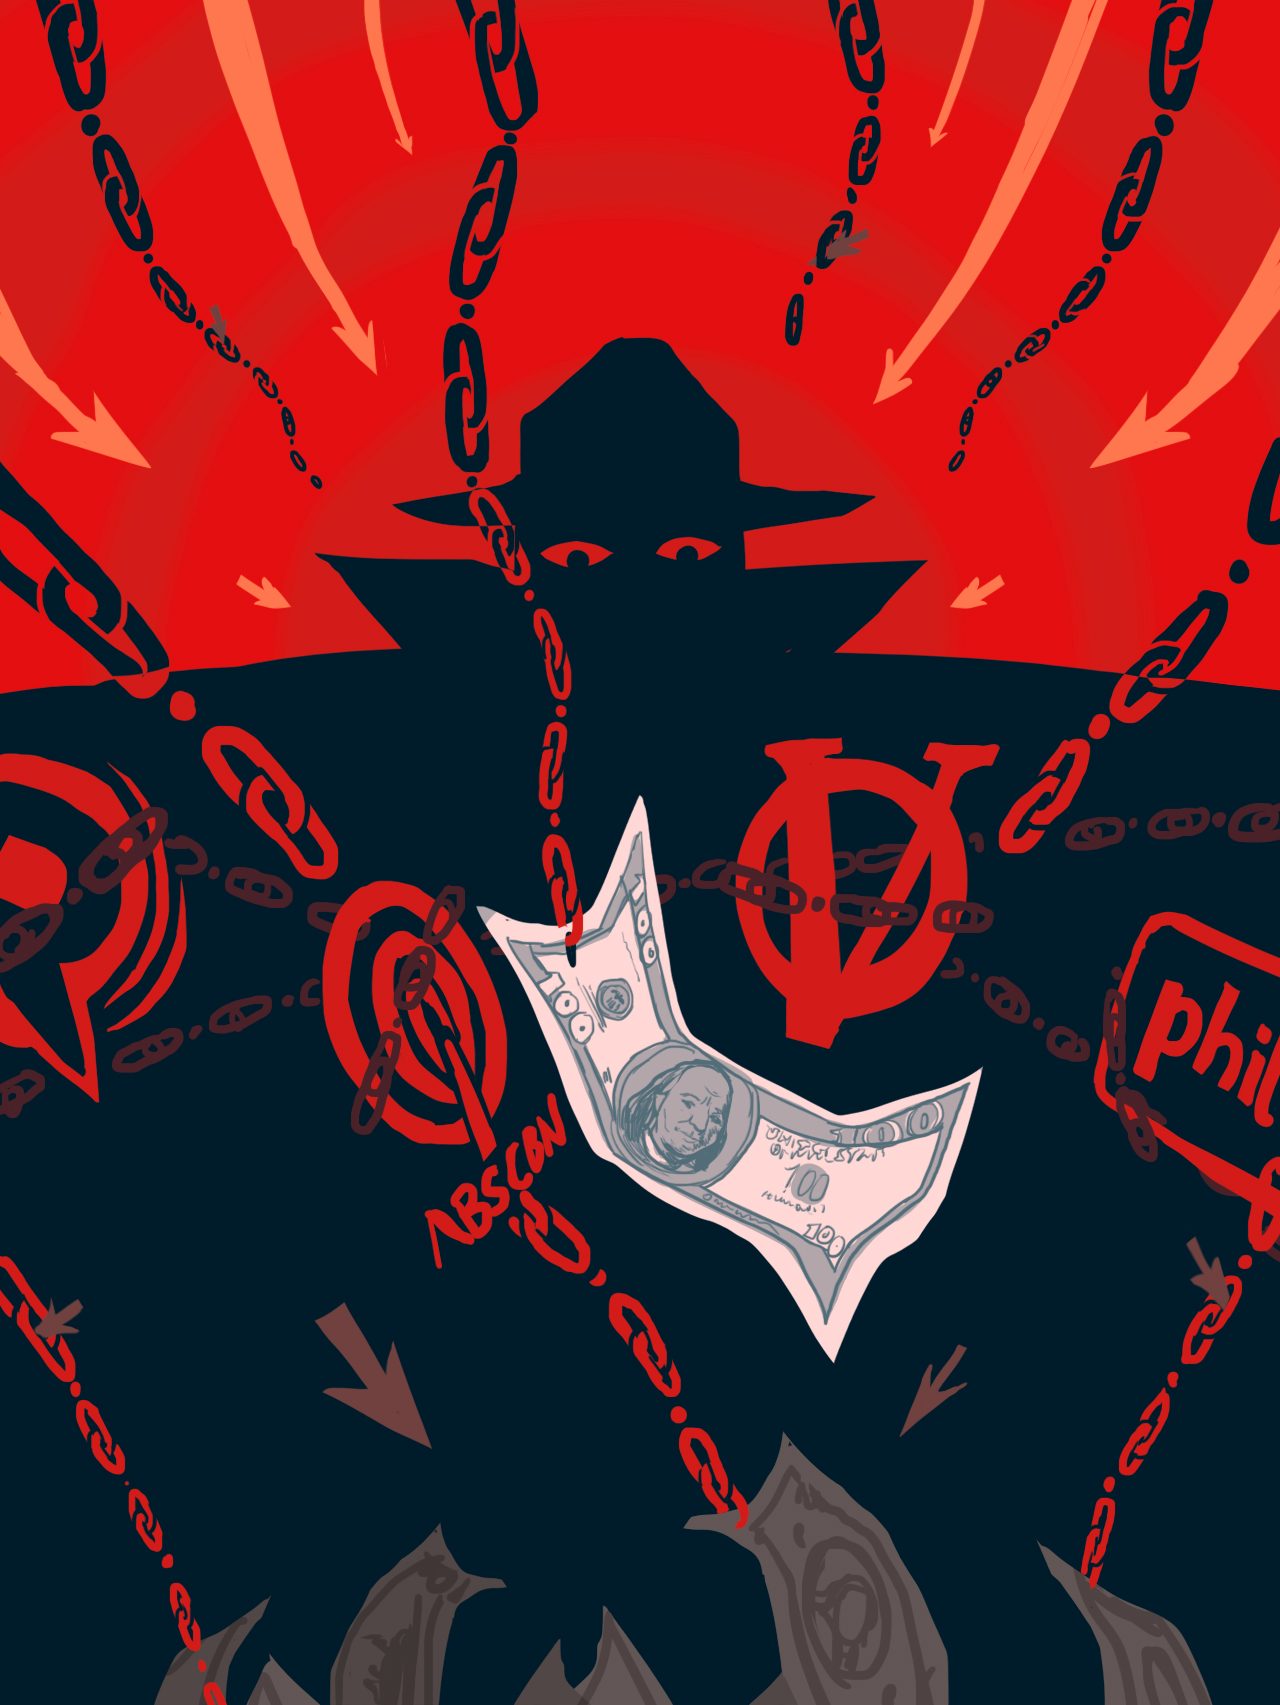 Spamming for ransom: The dubious business of black hat SEO marketing